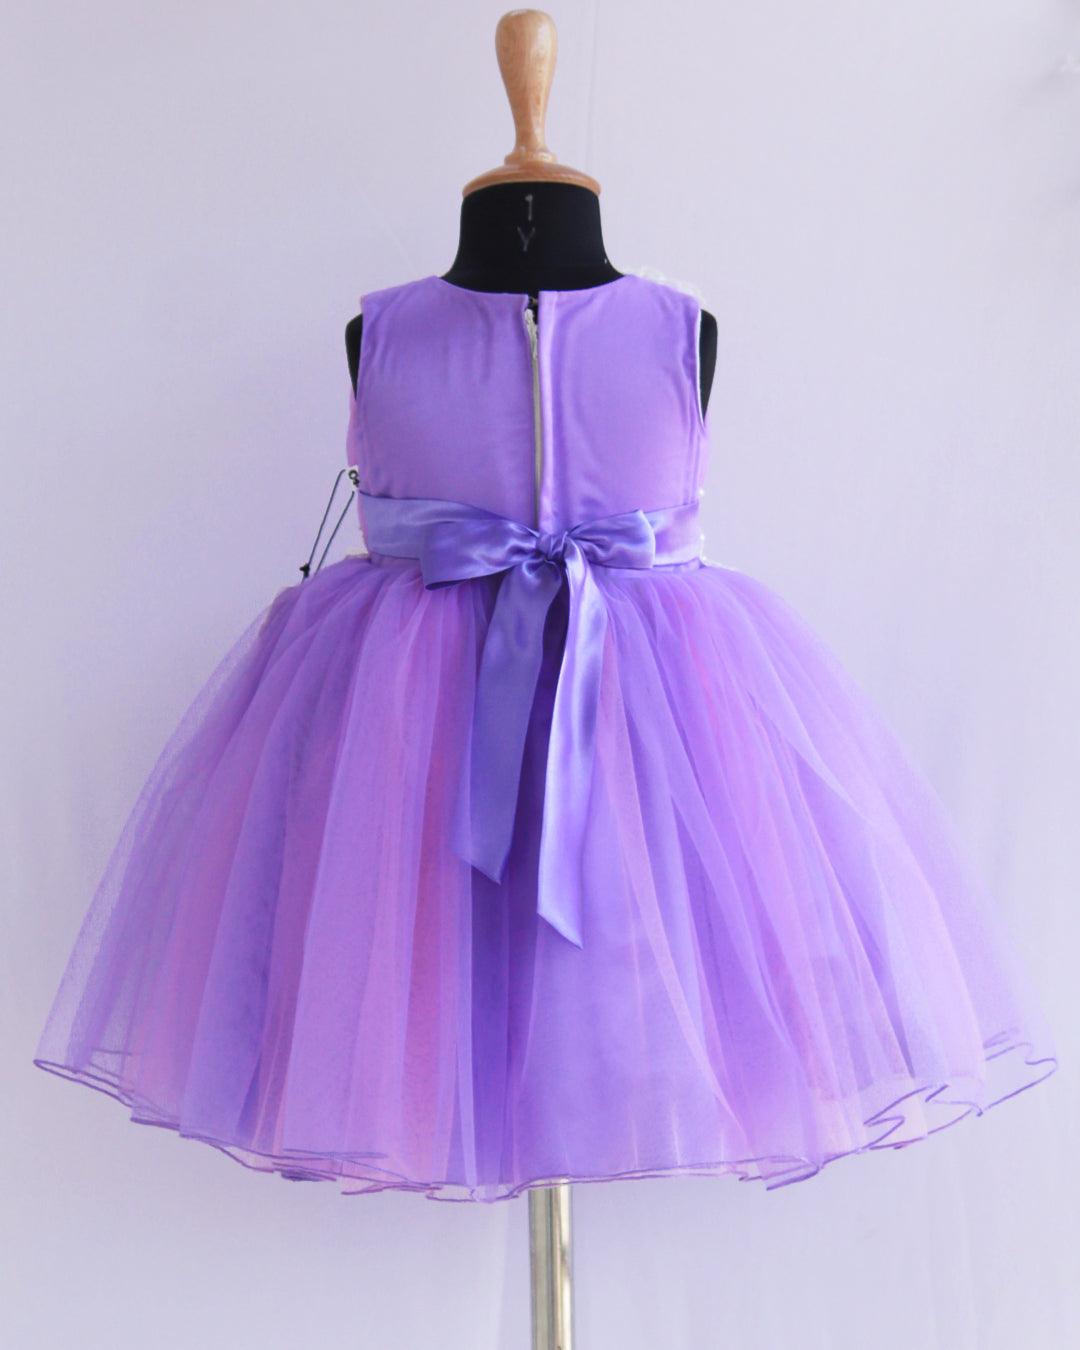 Lavender Pink Sleeveless Flower Frock
Material: Lavender Dual Shade Flower Frock is made with soft quality nylon net fabric with premium matching ultra satin material is used for glossy feel. Yoke porti